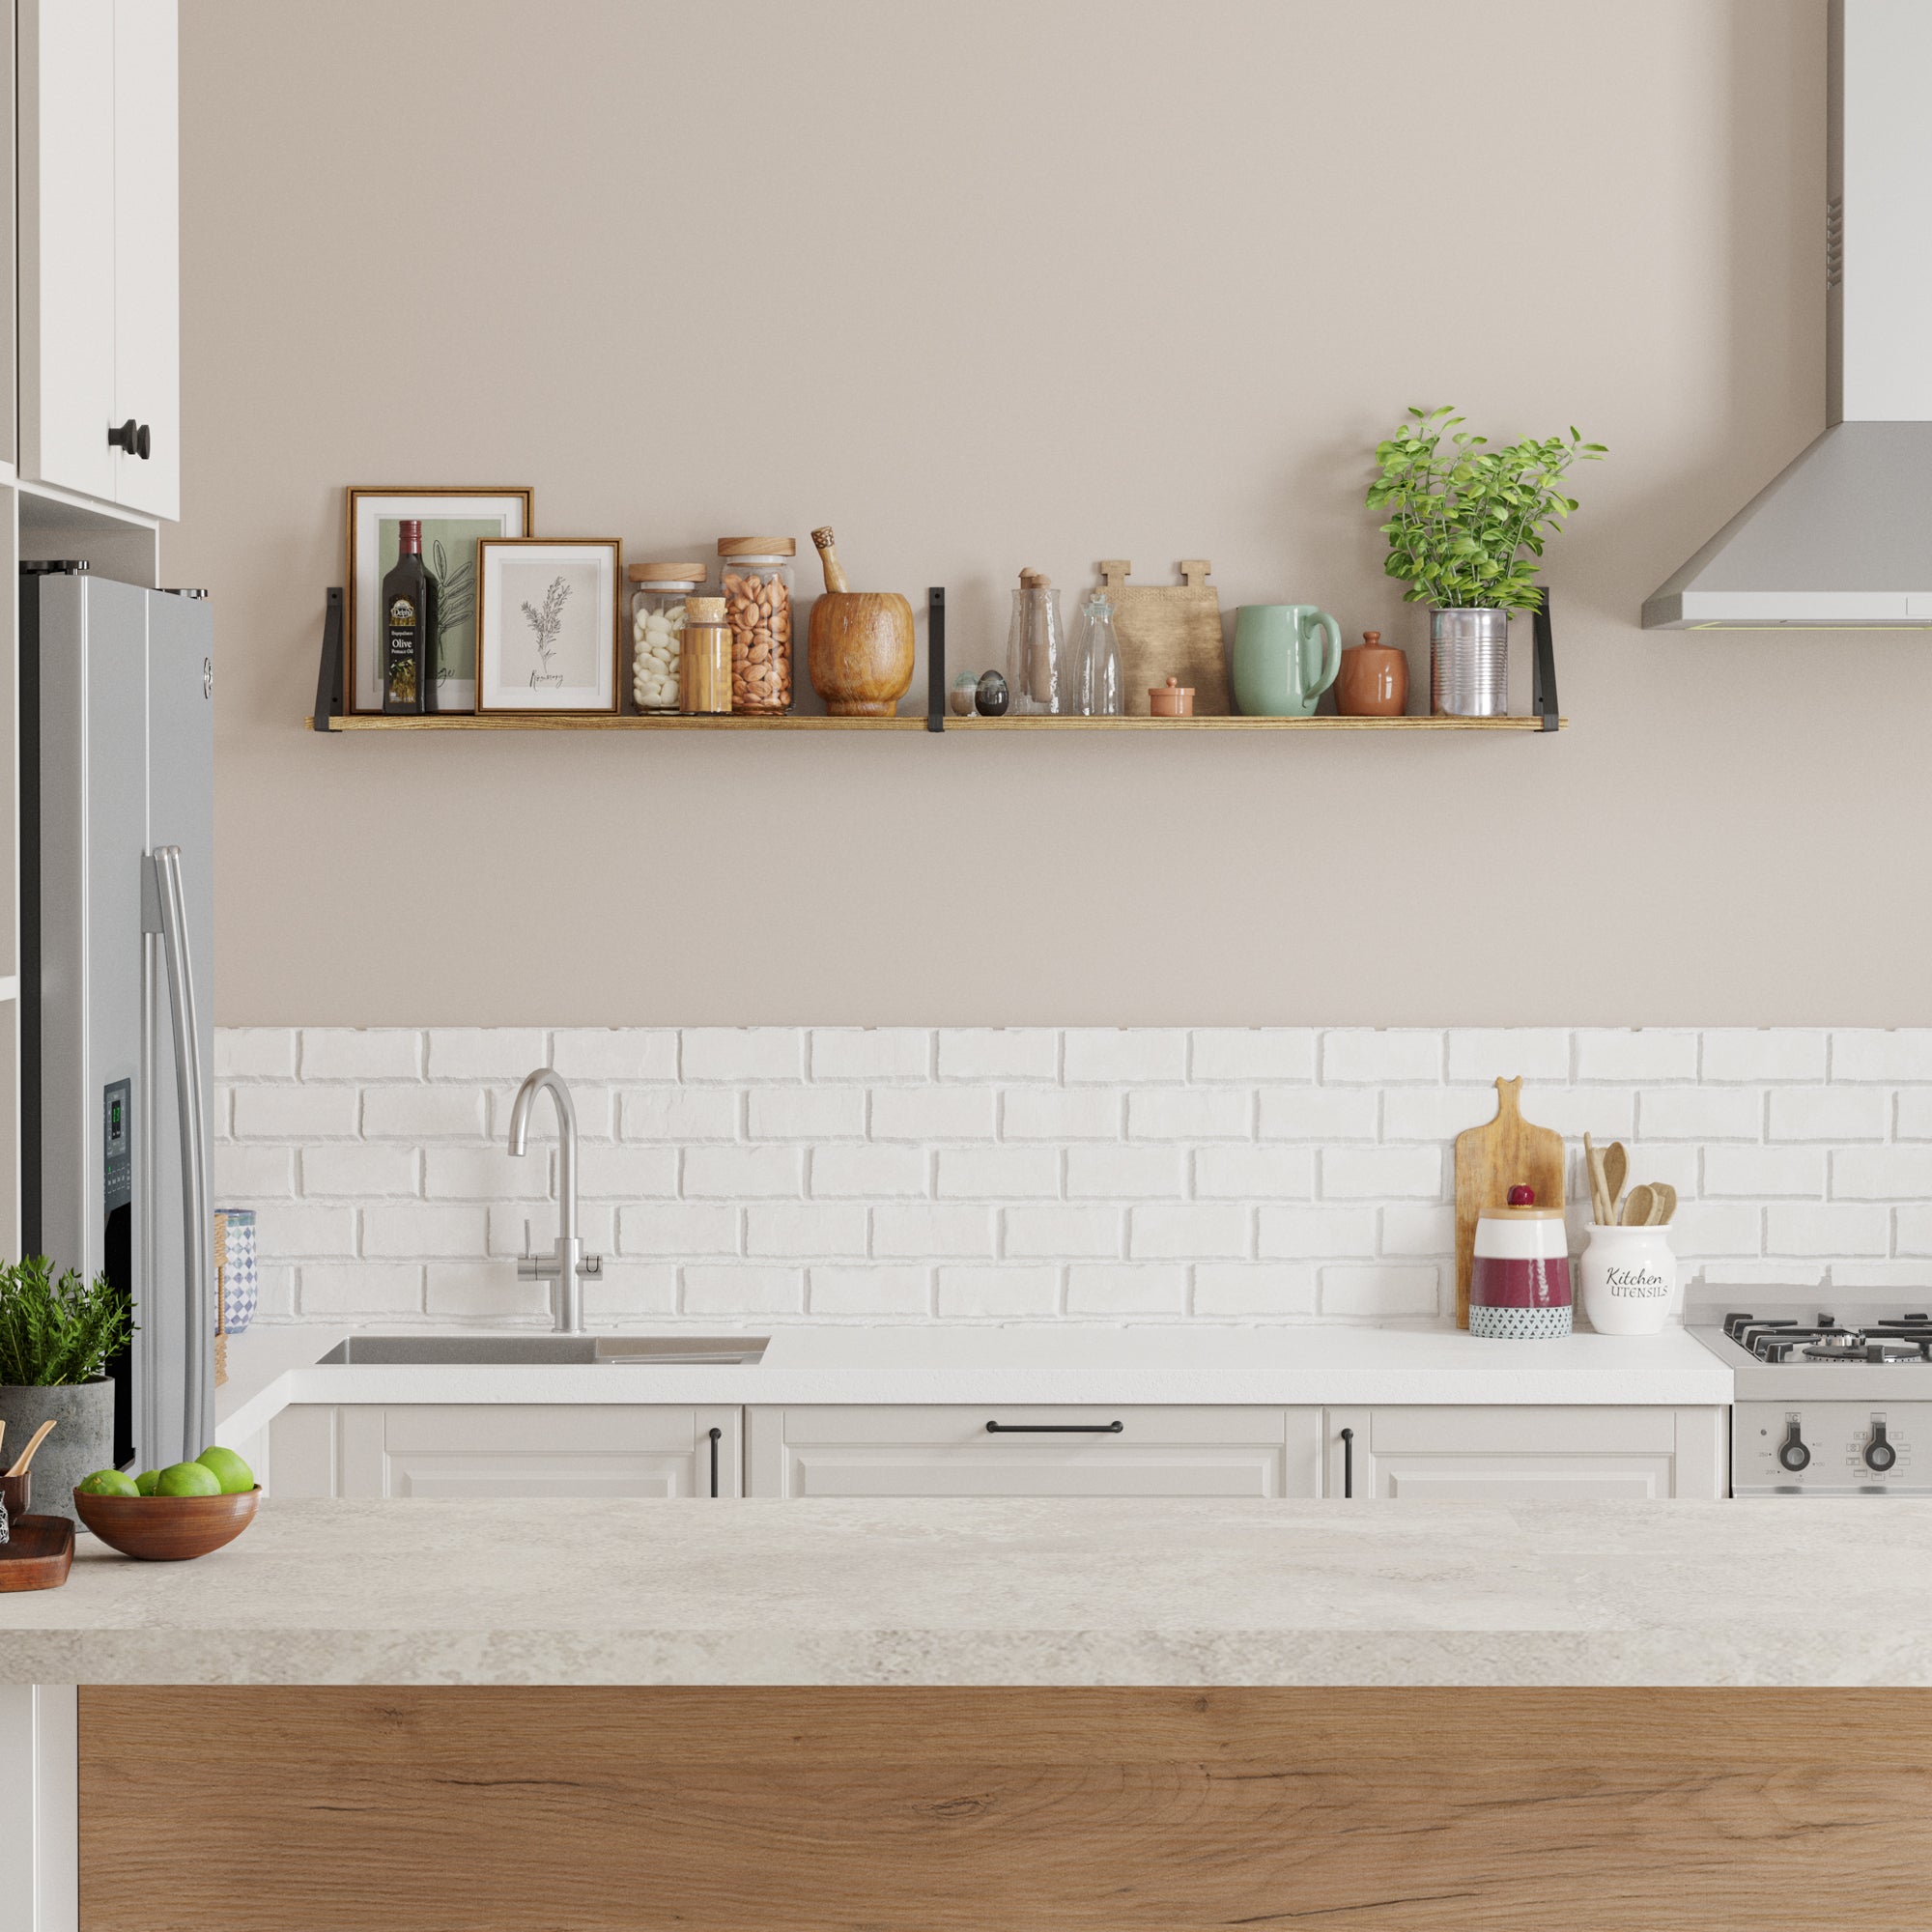 A well-organized kitchen shelf above a white tiled backsplash. The shelf holds various kitchen items like jars, bottles, a small plant, and decorative objects. Below, there's a modern countertop with cabinets and built-in appliances, suggesting a tidy and functional kitchen space.